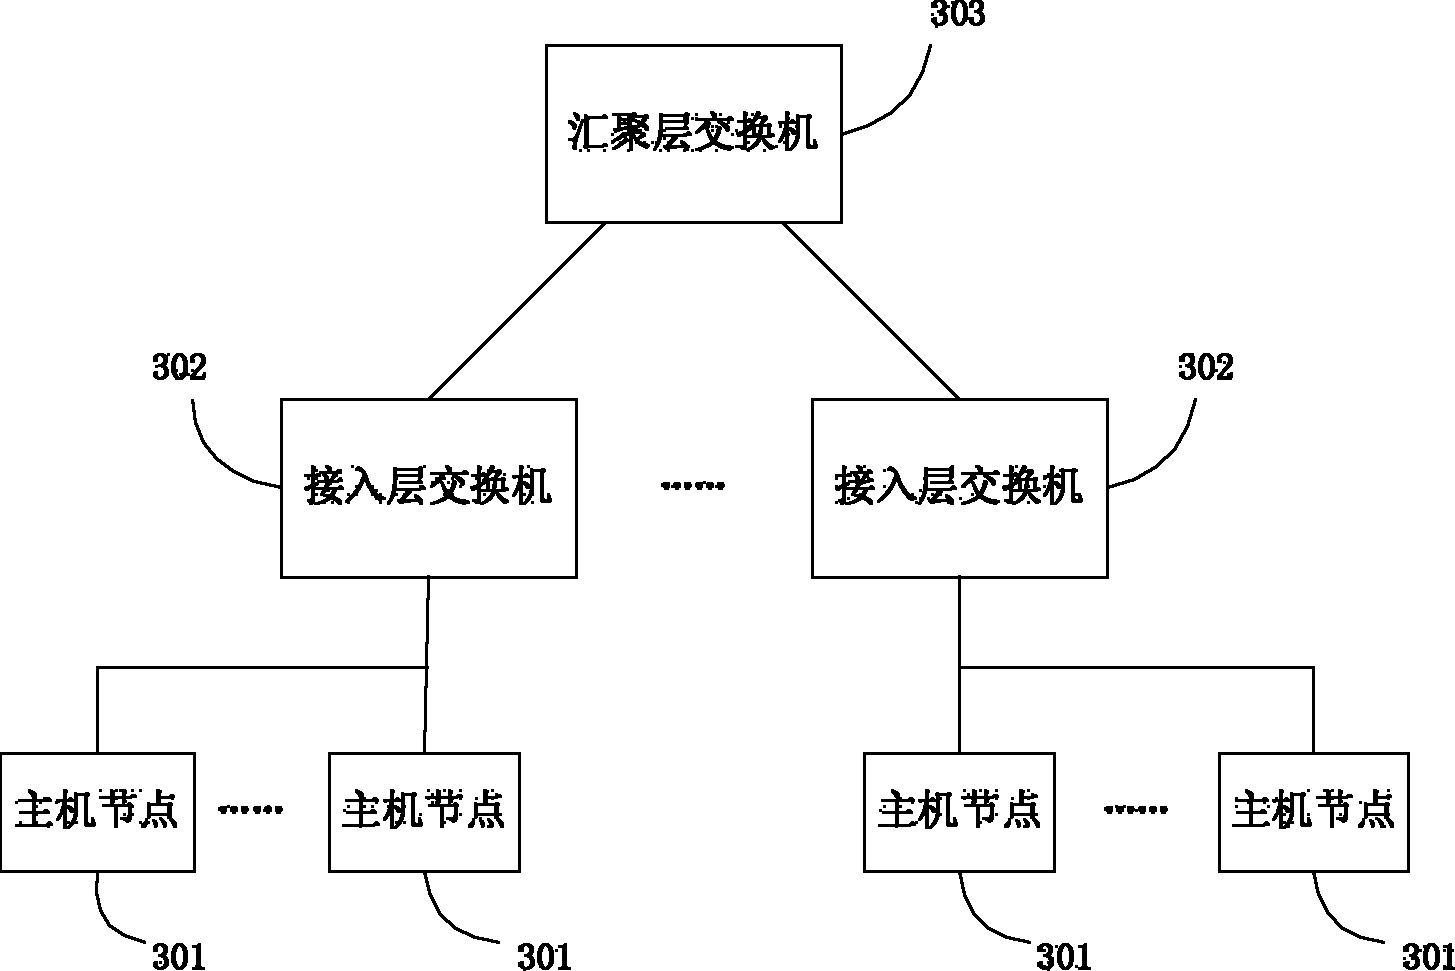 Method and system for preventing address resolution protocol (ARP) gateway spoofing